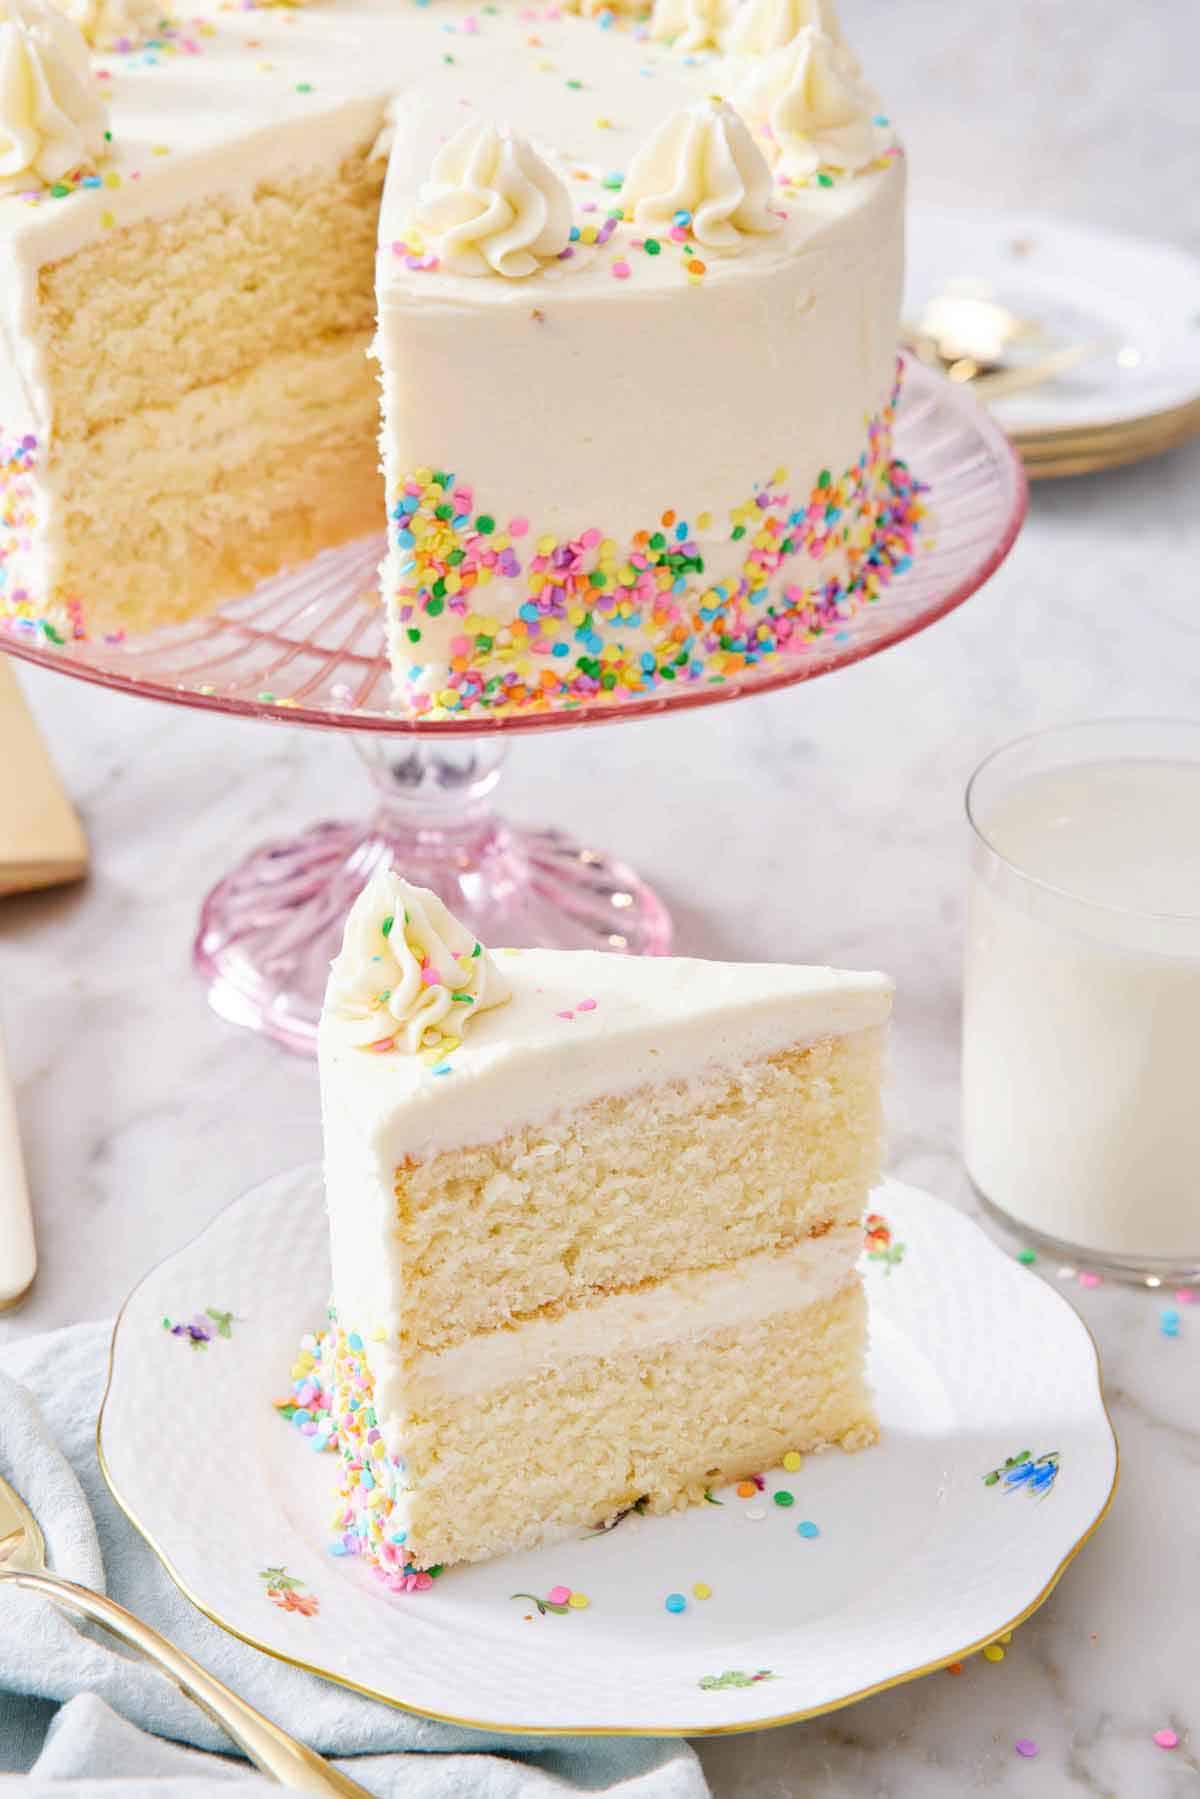 A slice of white cake on a plate with the rest of the cake in the background on a cake stand.